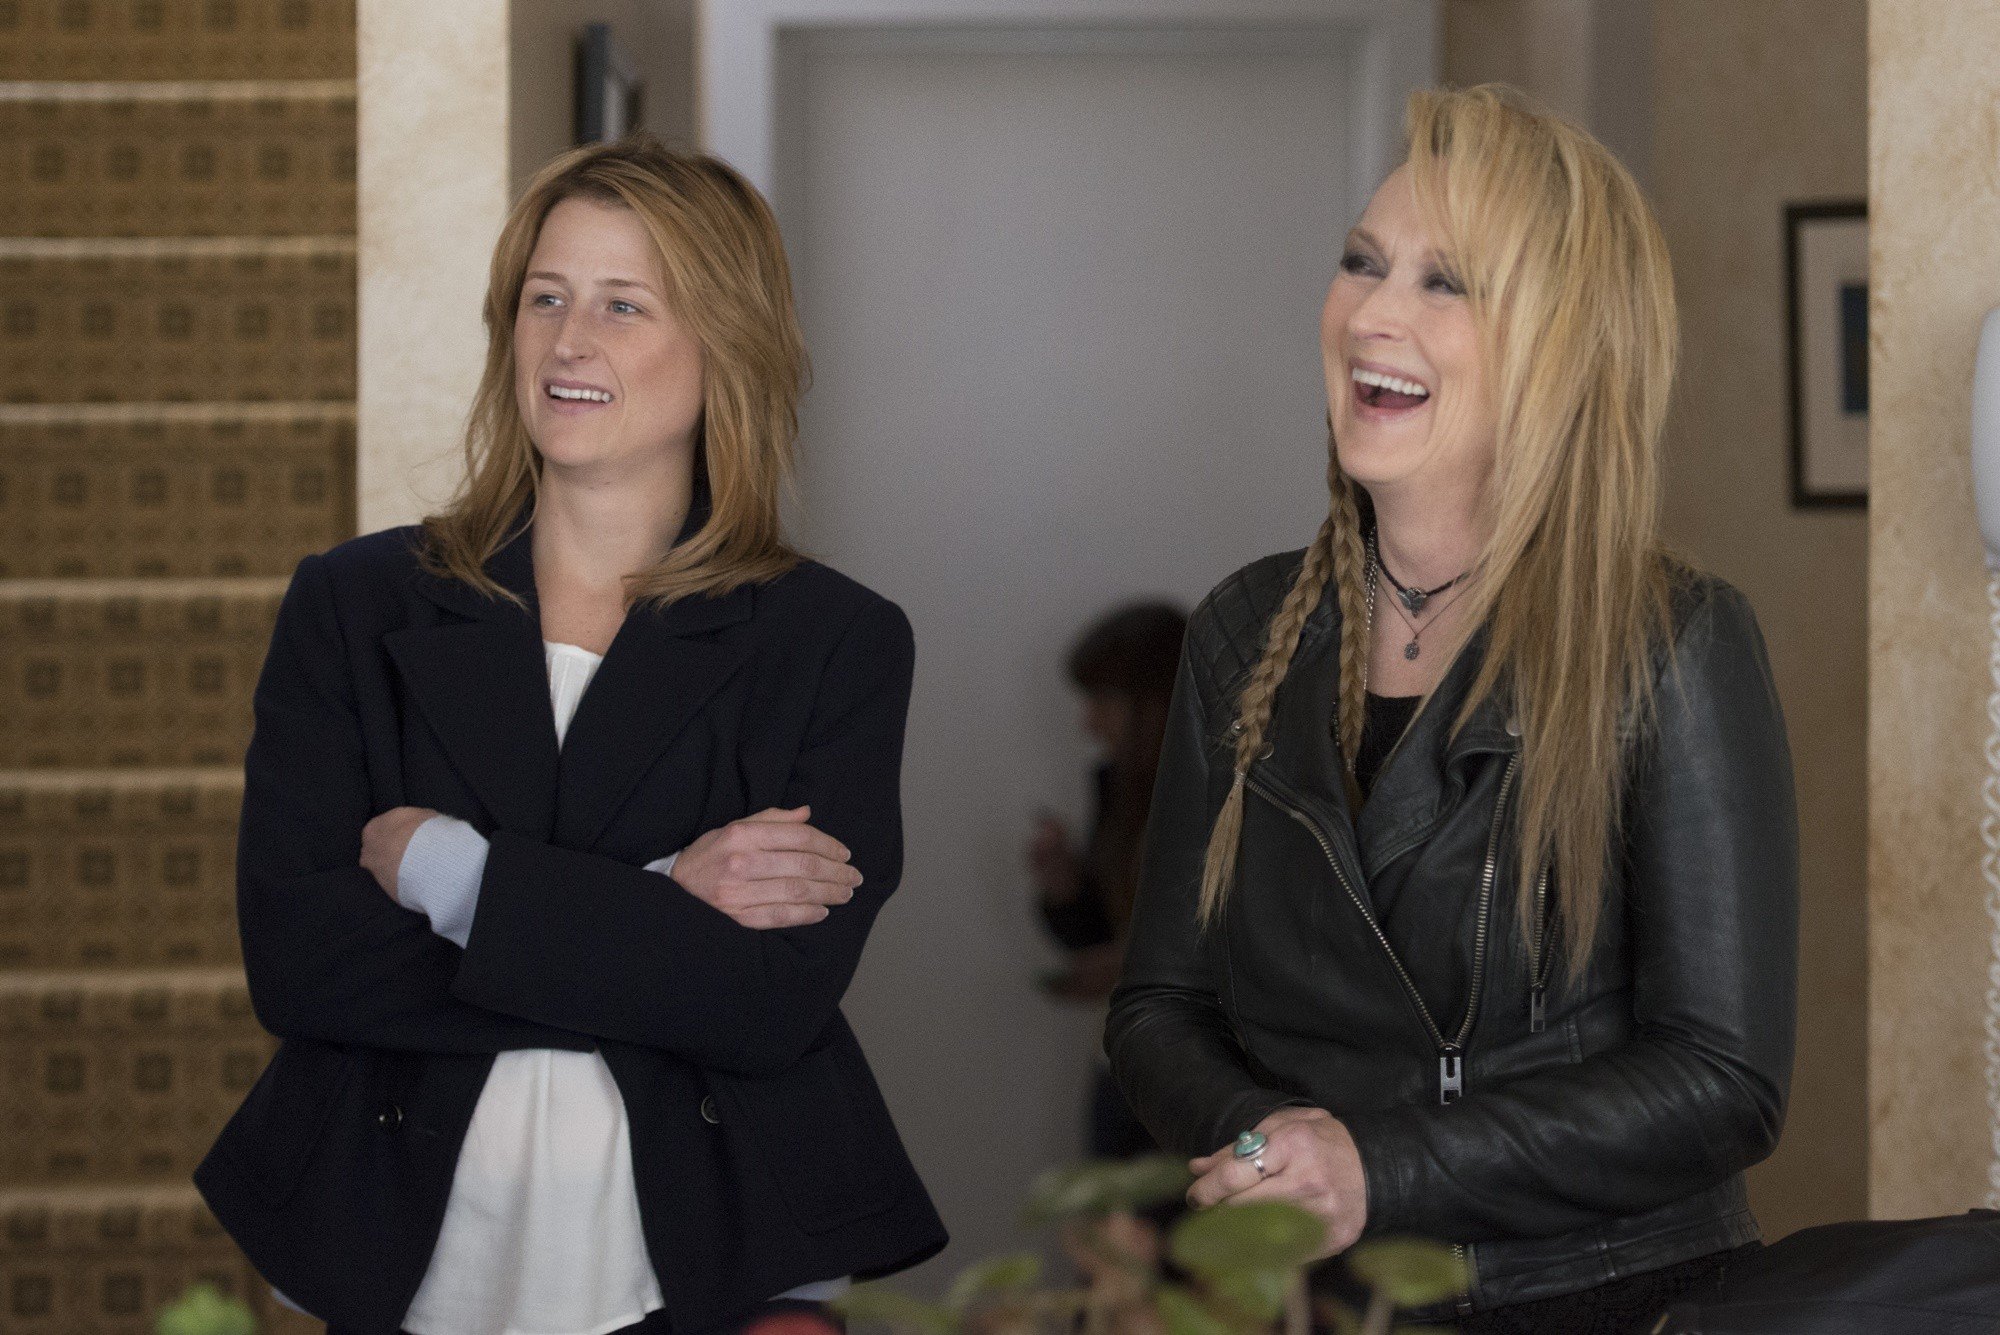 Mamie Gummer stars as Julie and Meryl Streep stars as Ricki in TriStar Pictures' Ricki and the Flash (2015)